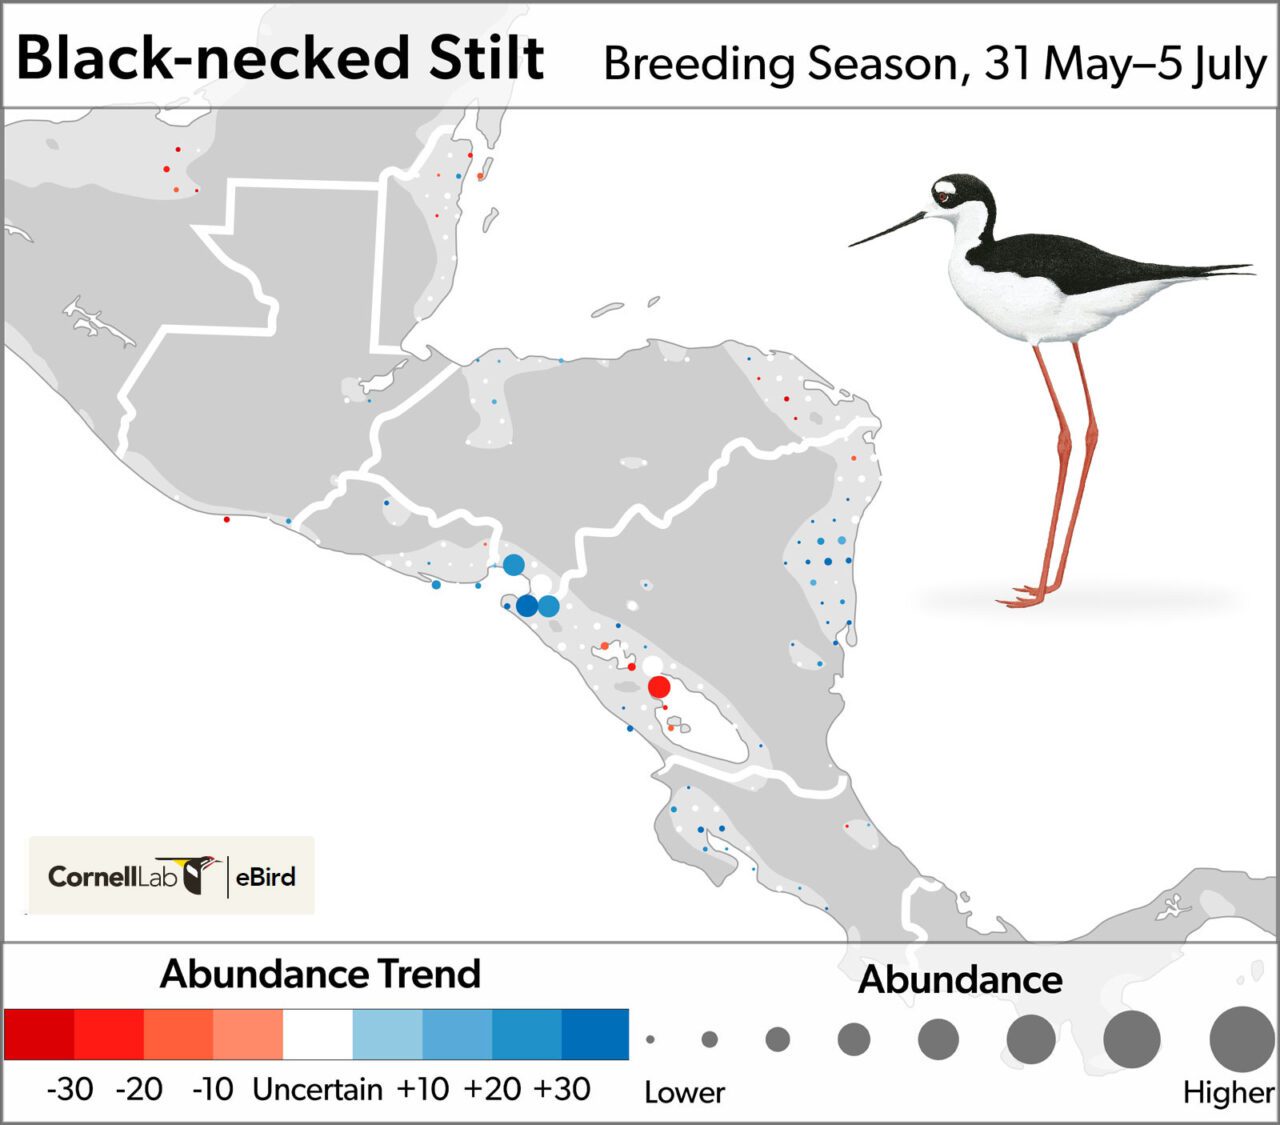 Gray and white map with red and blue colored dots showing abundance of the species, and an illustration of a black and white bird with long orange legs.